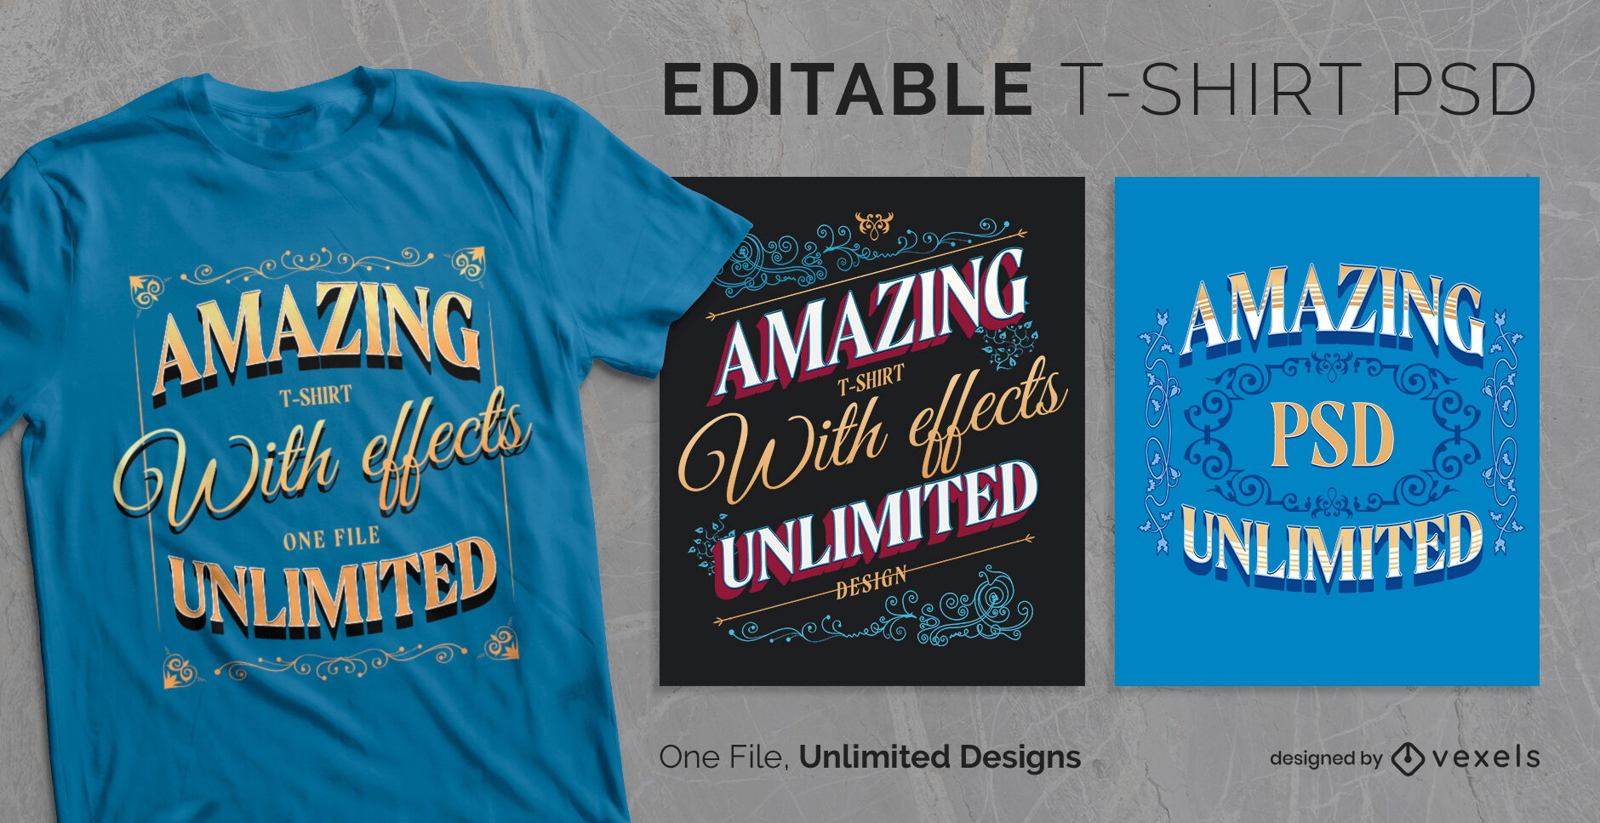 Vintage quotes scalable t-shirt psd